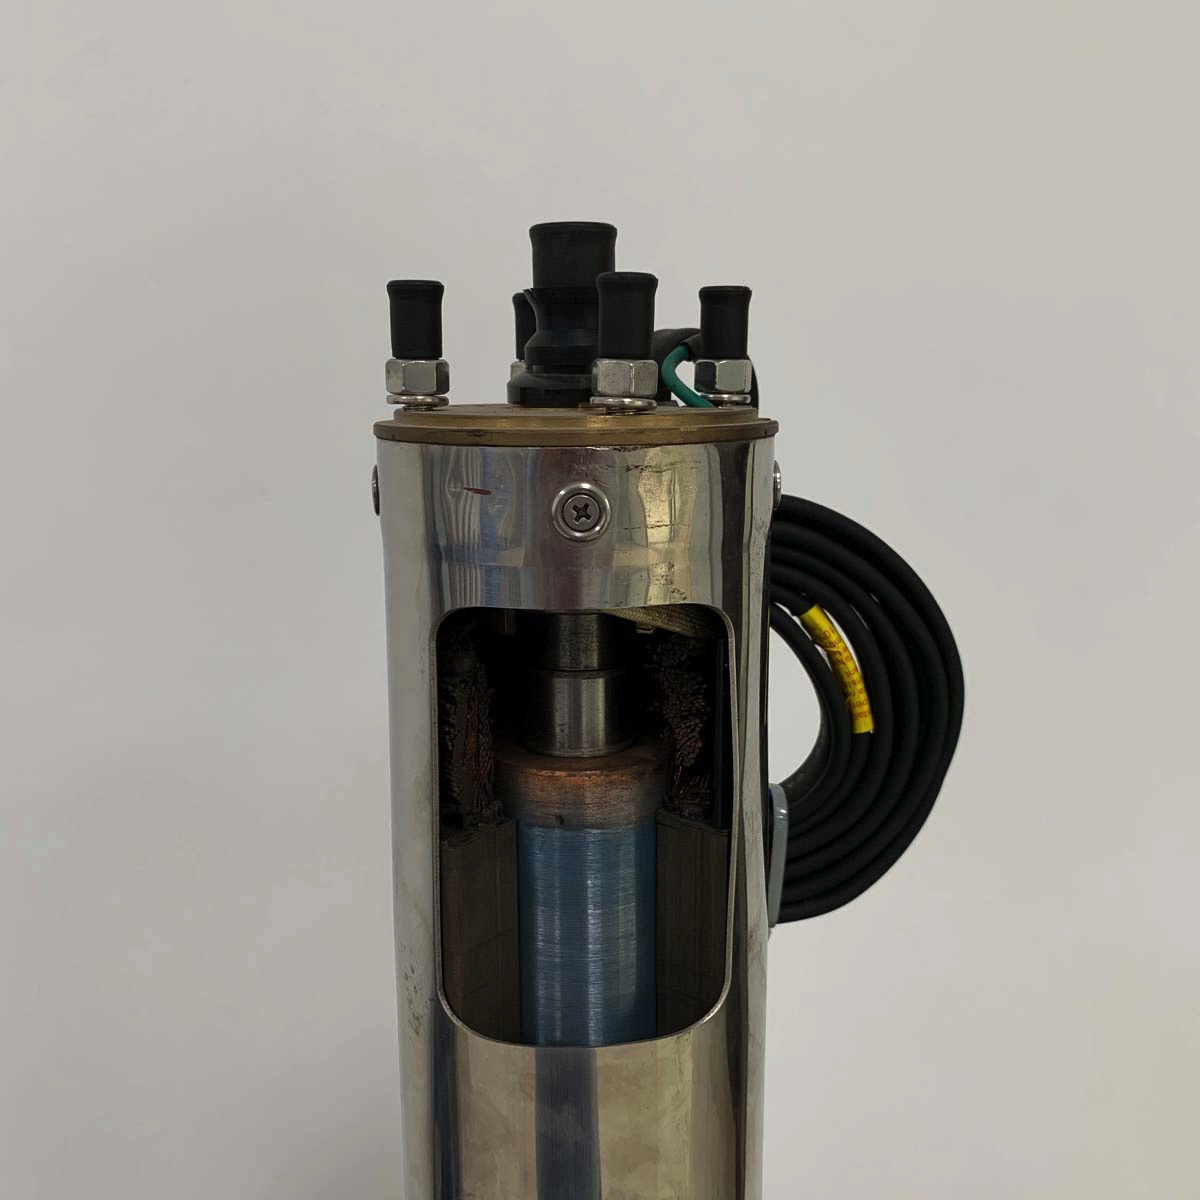 Submersible Motor Manufacturers Open Well Water Sump Motor Price List 1 Hp 1.5Hp 7.5 Hp 1Hp Irrigation Pump